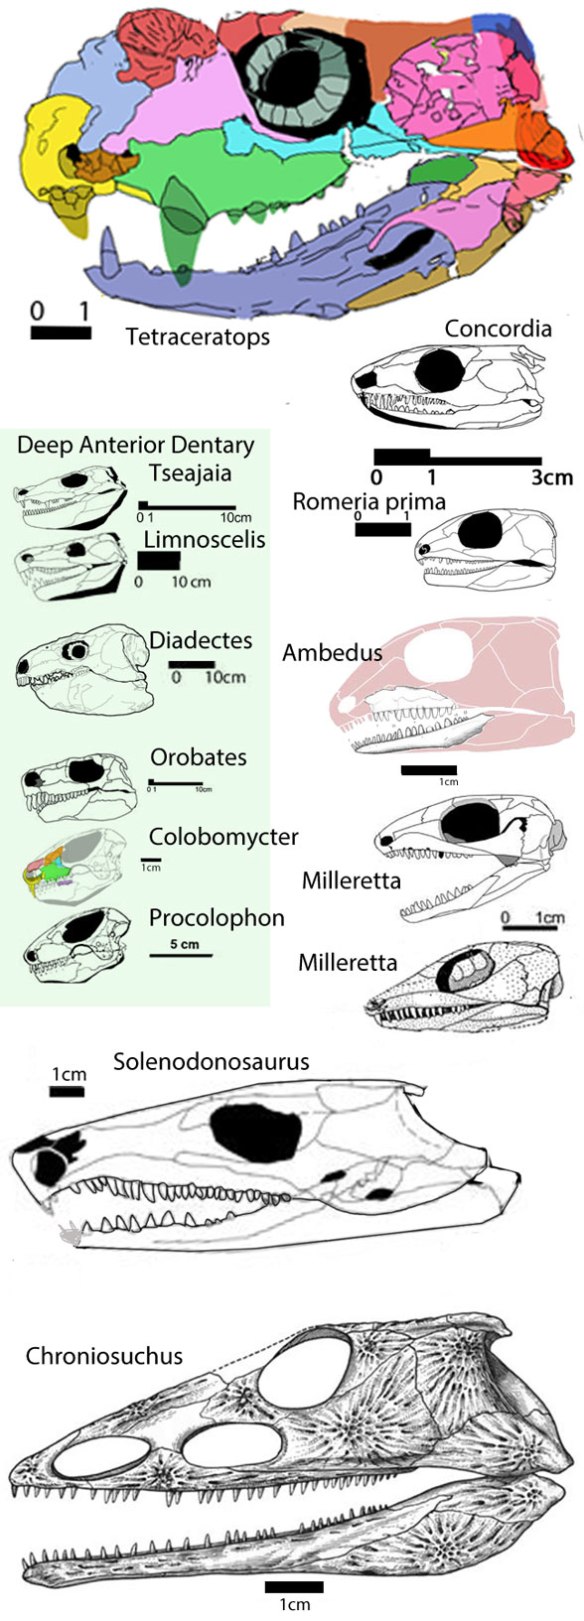 Figure 1. Ambedus pusillus compared to candidate sister taxa. The shallow mandible and small size of this adult does not match the deep mandible found in diadectids, but more closely matches millerettids, solenodonsaurs and chroniosuchids. The outgroup of all of these taxa is Romeria primes, which has a medium depth dentary. 